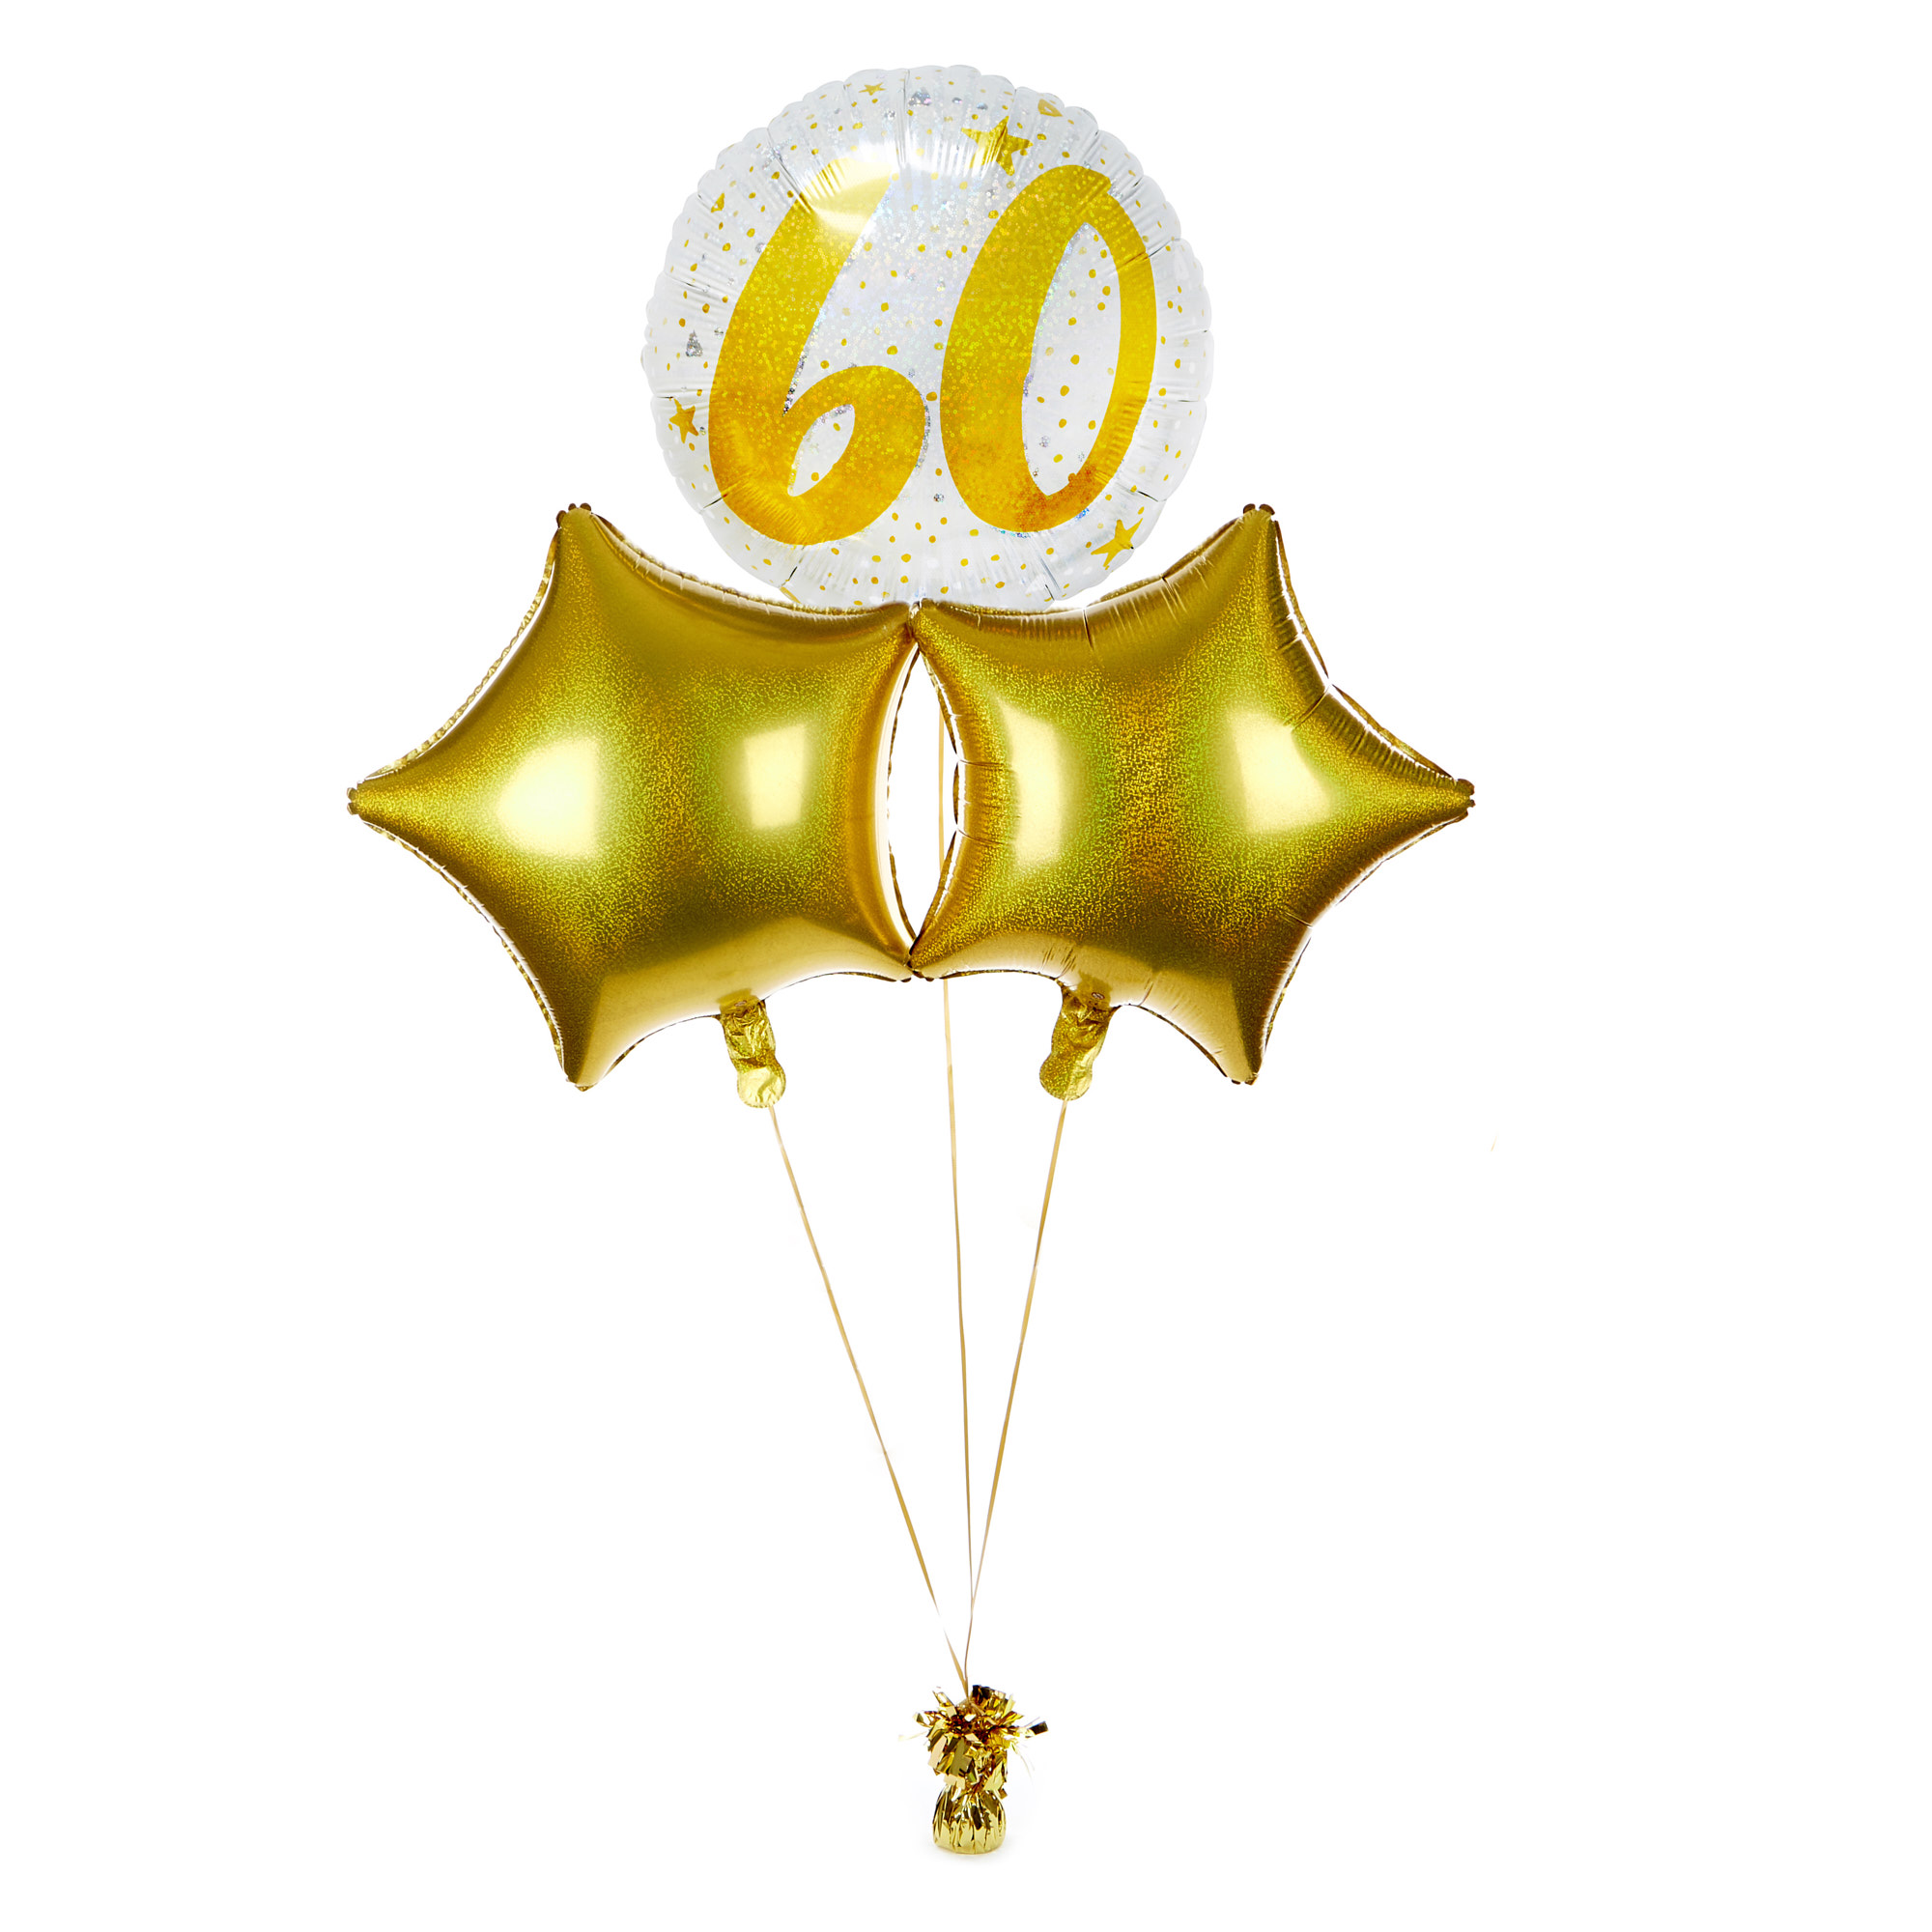 Gold & Silver 60th Birthday Balloon Bouquet - DELIVERED INFLATED!